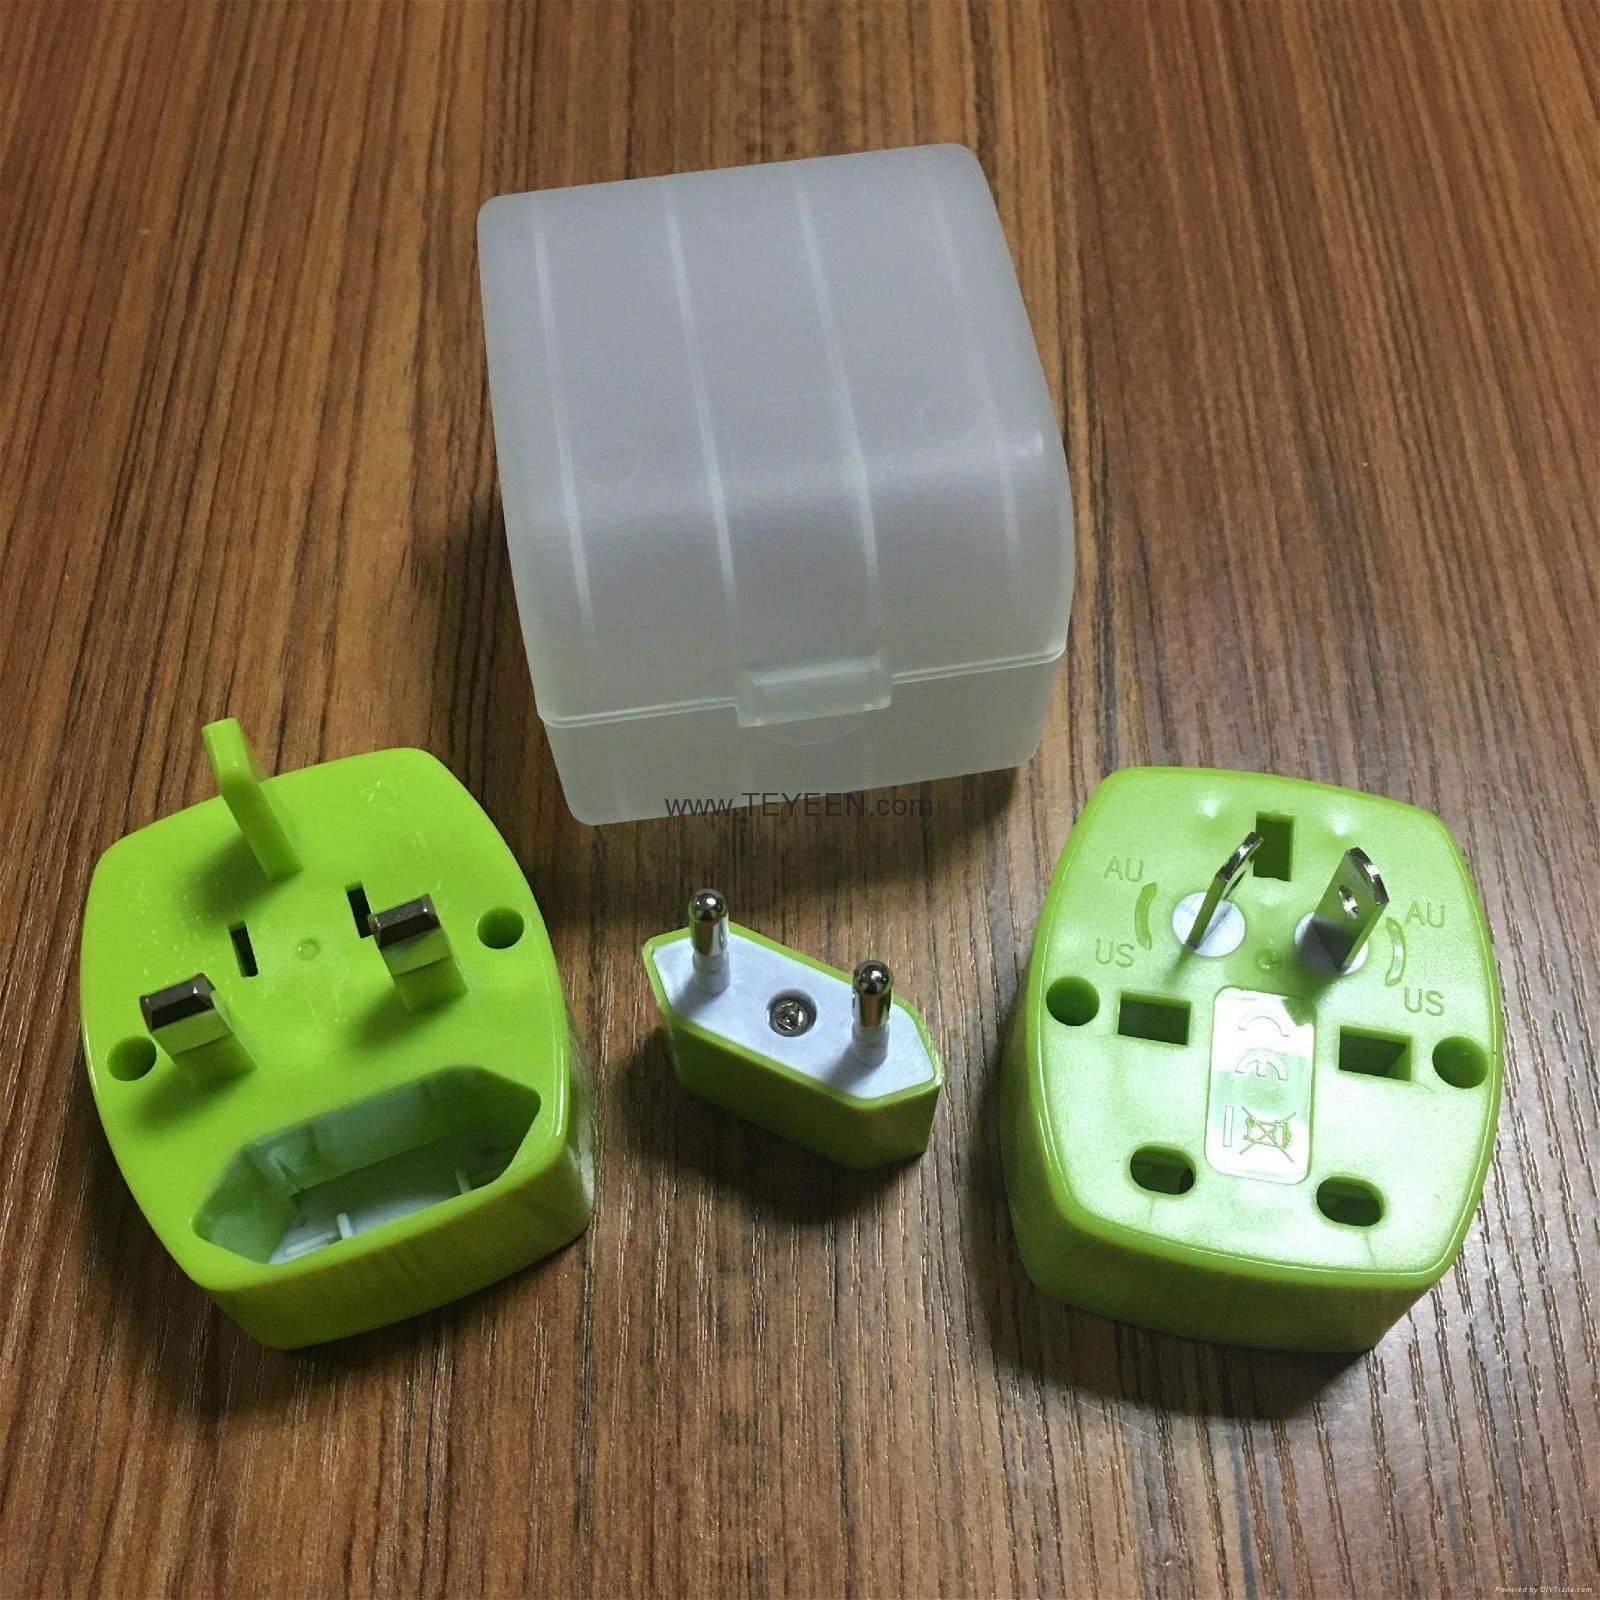 New Travel Adapter with USB Charger (DY-32U) 2